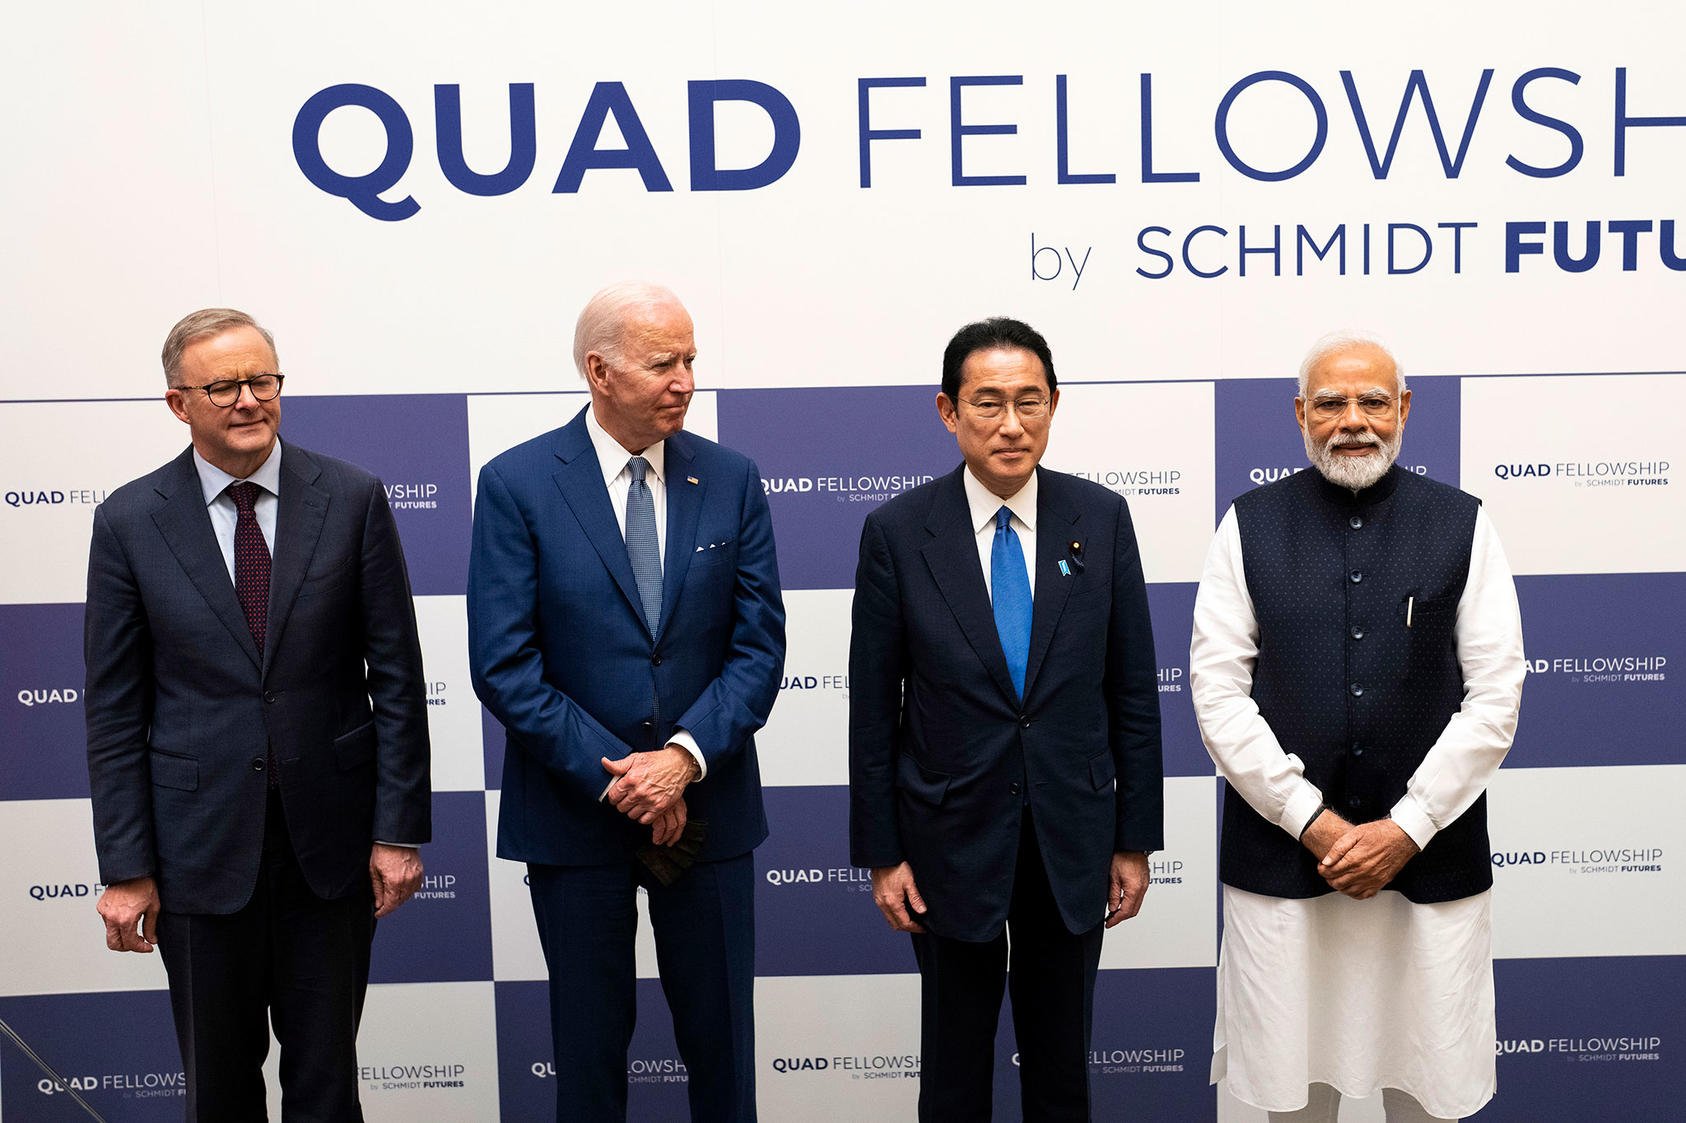 President Joe Biden, second from left, with, from left, Prime Minister Anthony Albanese of Australia, Prime Minister Fumio Kishida of Japan and Prime Minister Narendra Modi of India in Tokyo on Tuesday, May 24, 2022. (Doug Mills/The New York Times)